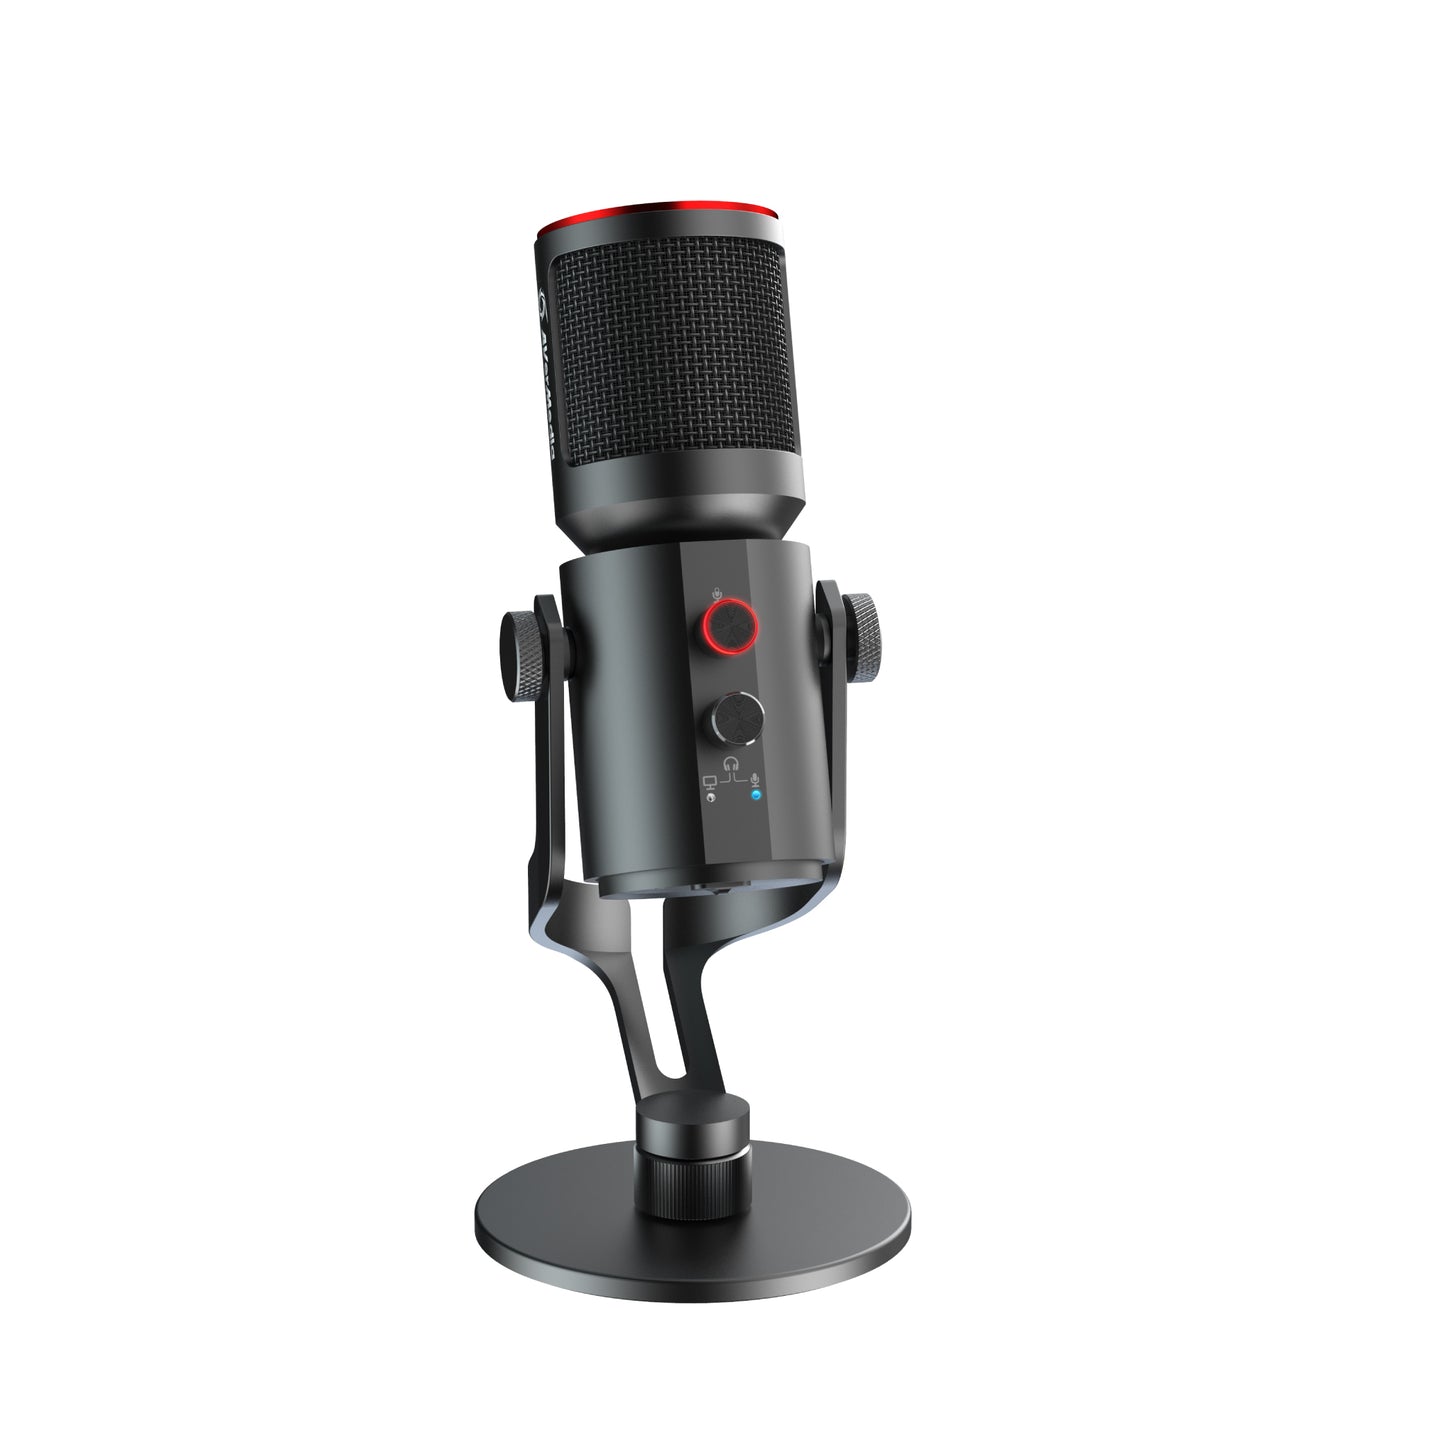 [Limited Edition] AVerMedia AM350 Live Streamer Microphone Kit